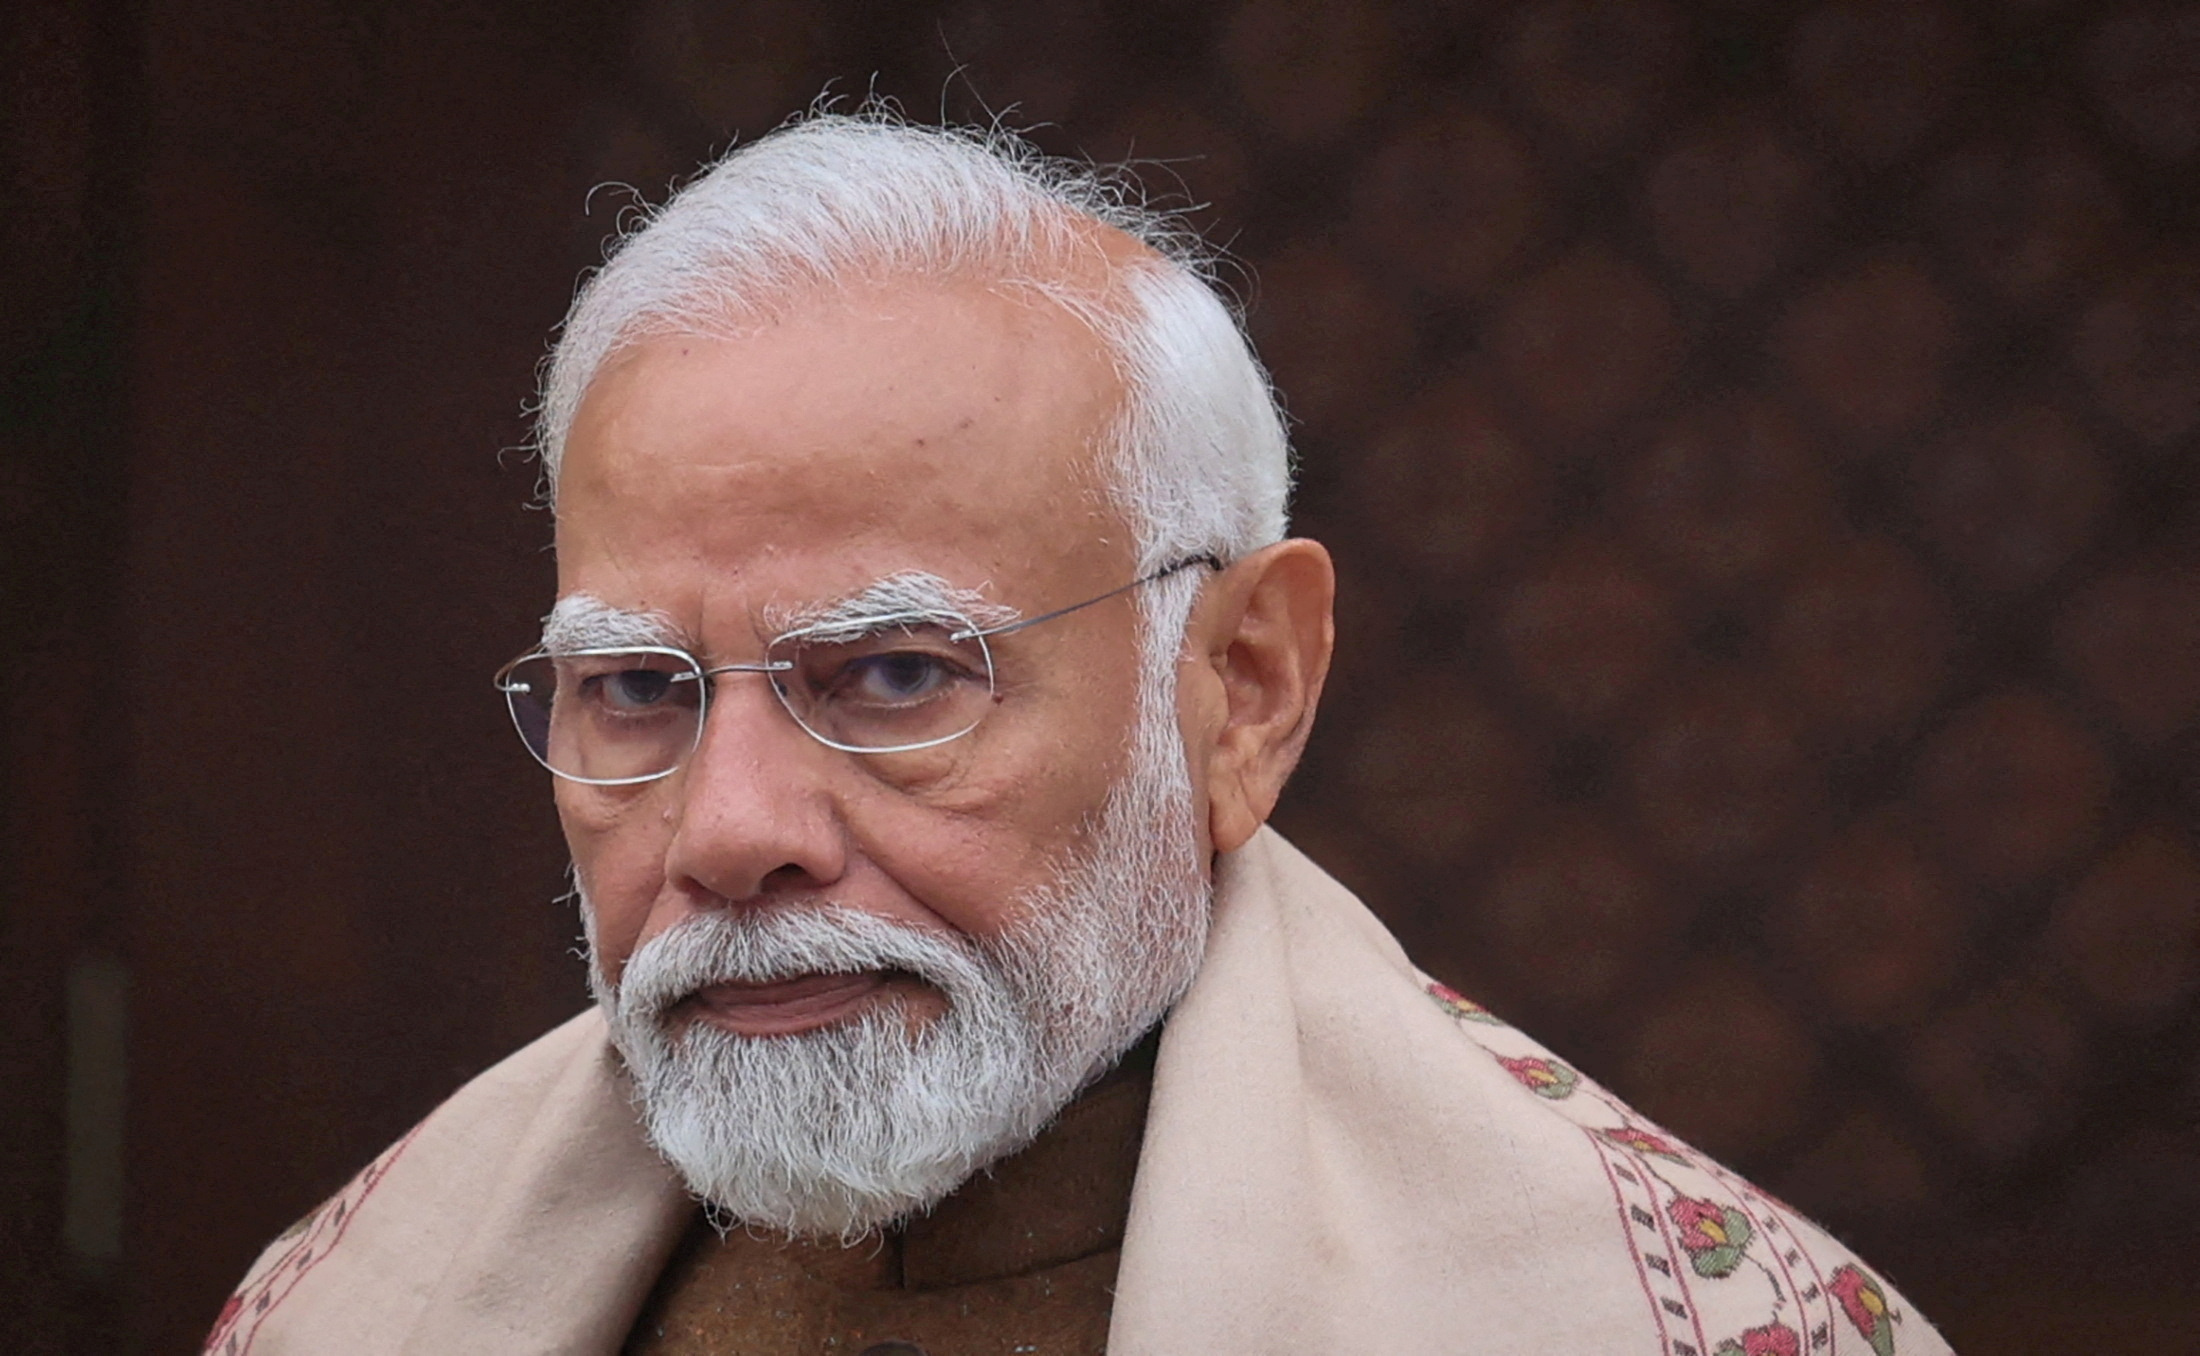 India's PM Modi looks on after speaking with media inside parliament premises, in New Delhi